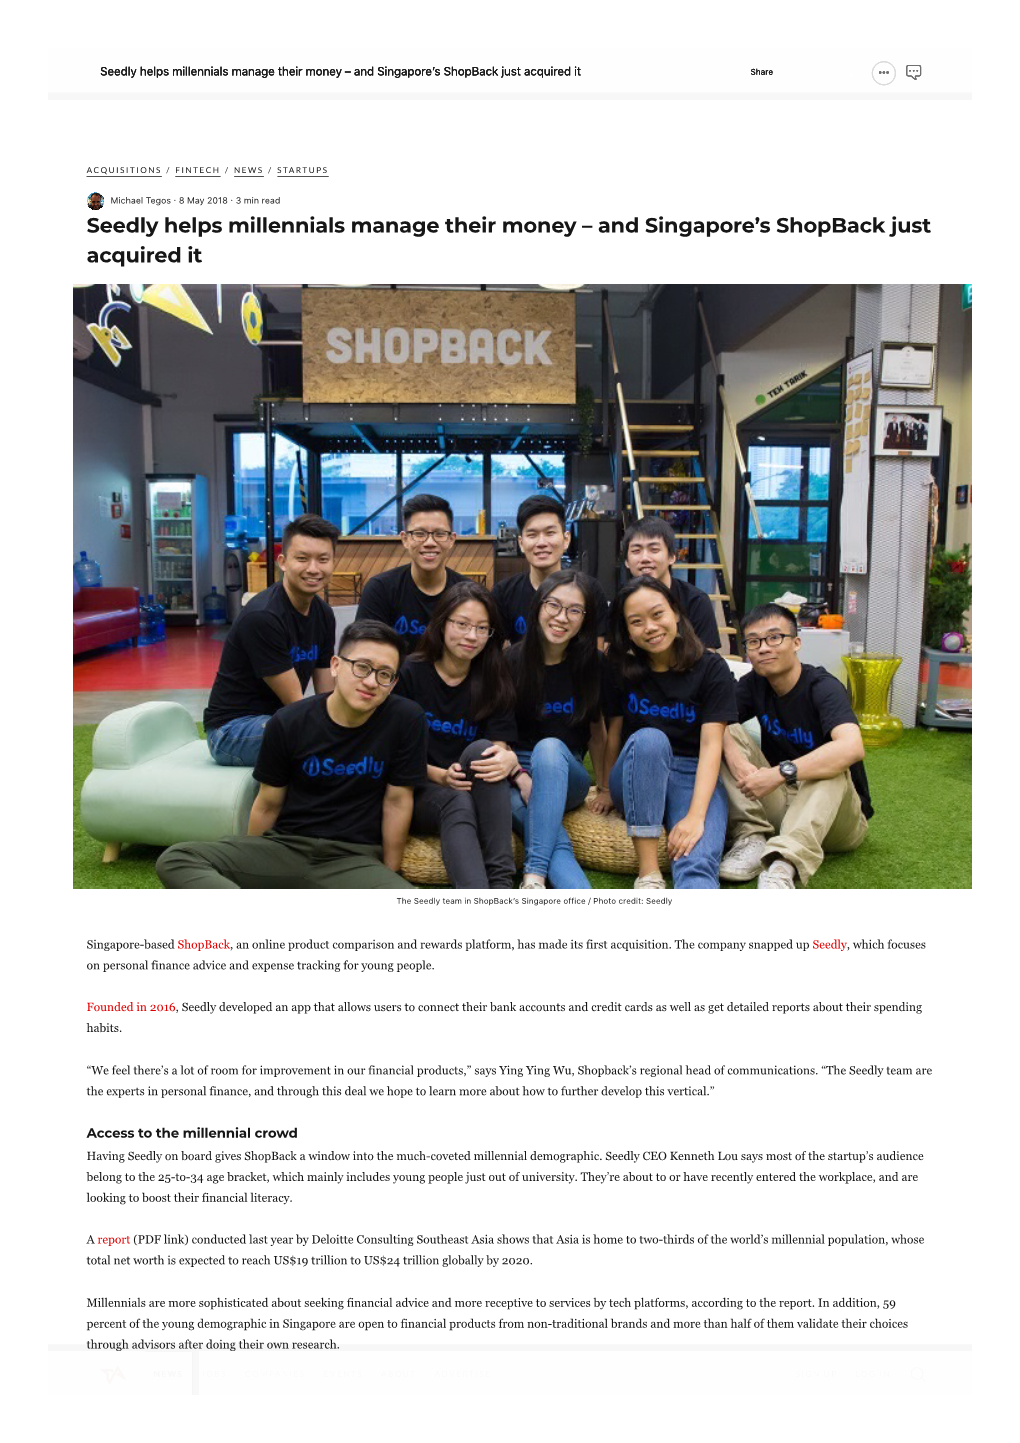 And Singapore's Shopback Just Acquired It